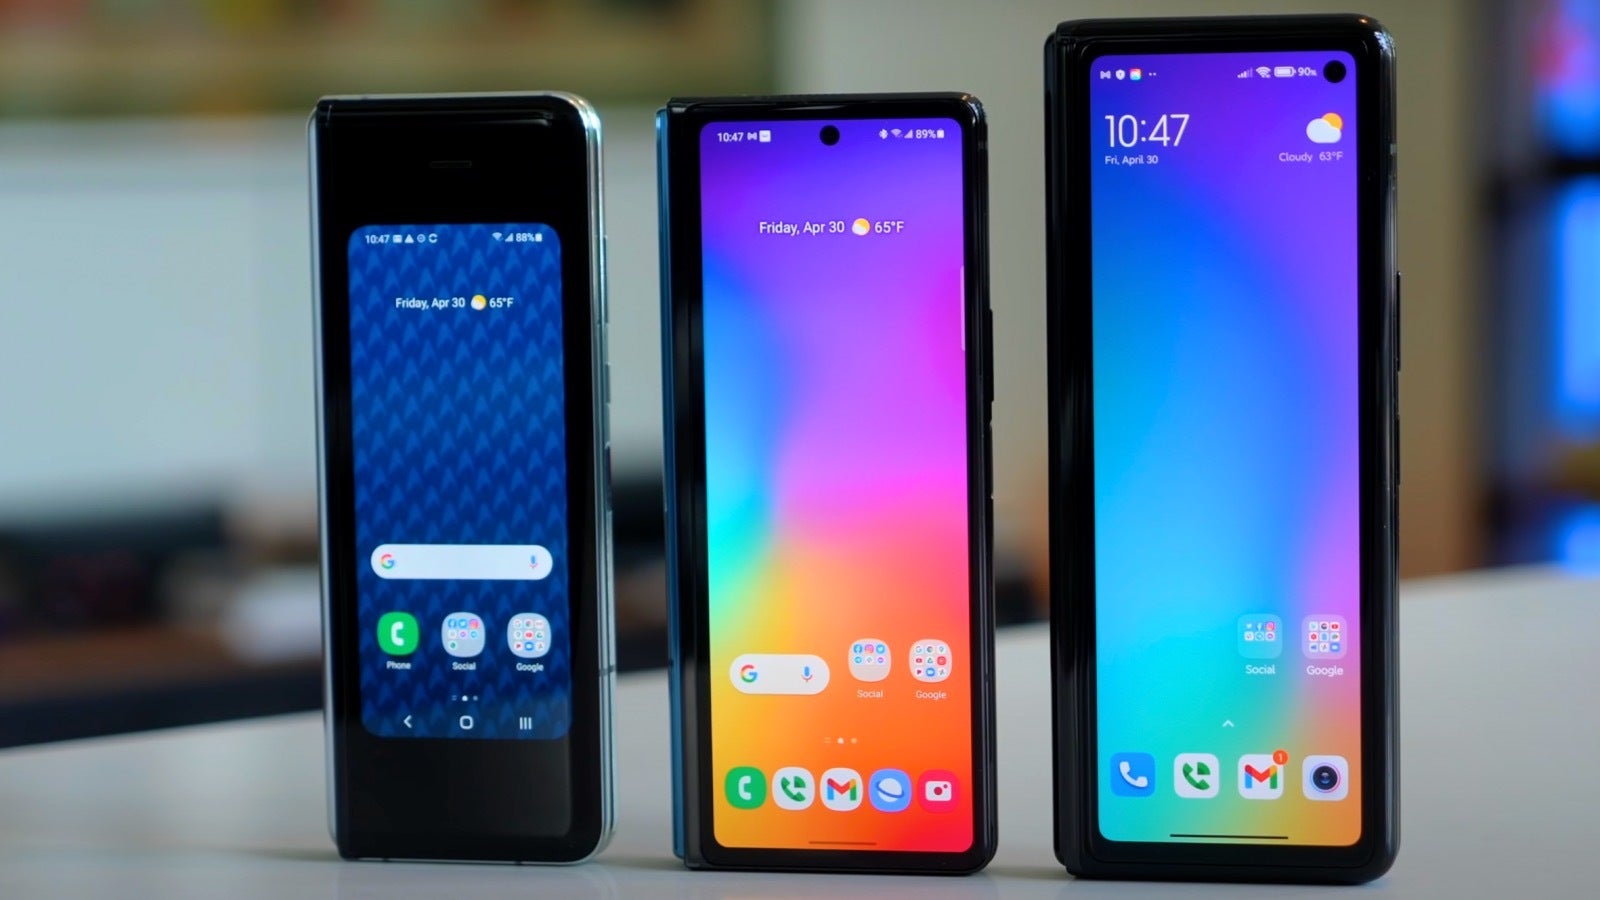 From left to right - Galaxy Fold, Galaxy Z Fold 2, Xiaomi Mix Fold.  Image courtesy of Michael Fisher.  - The "boring" iPhone won!  Not buying an Android phone ever again - unless it can fold in half